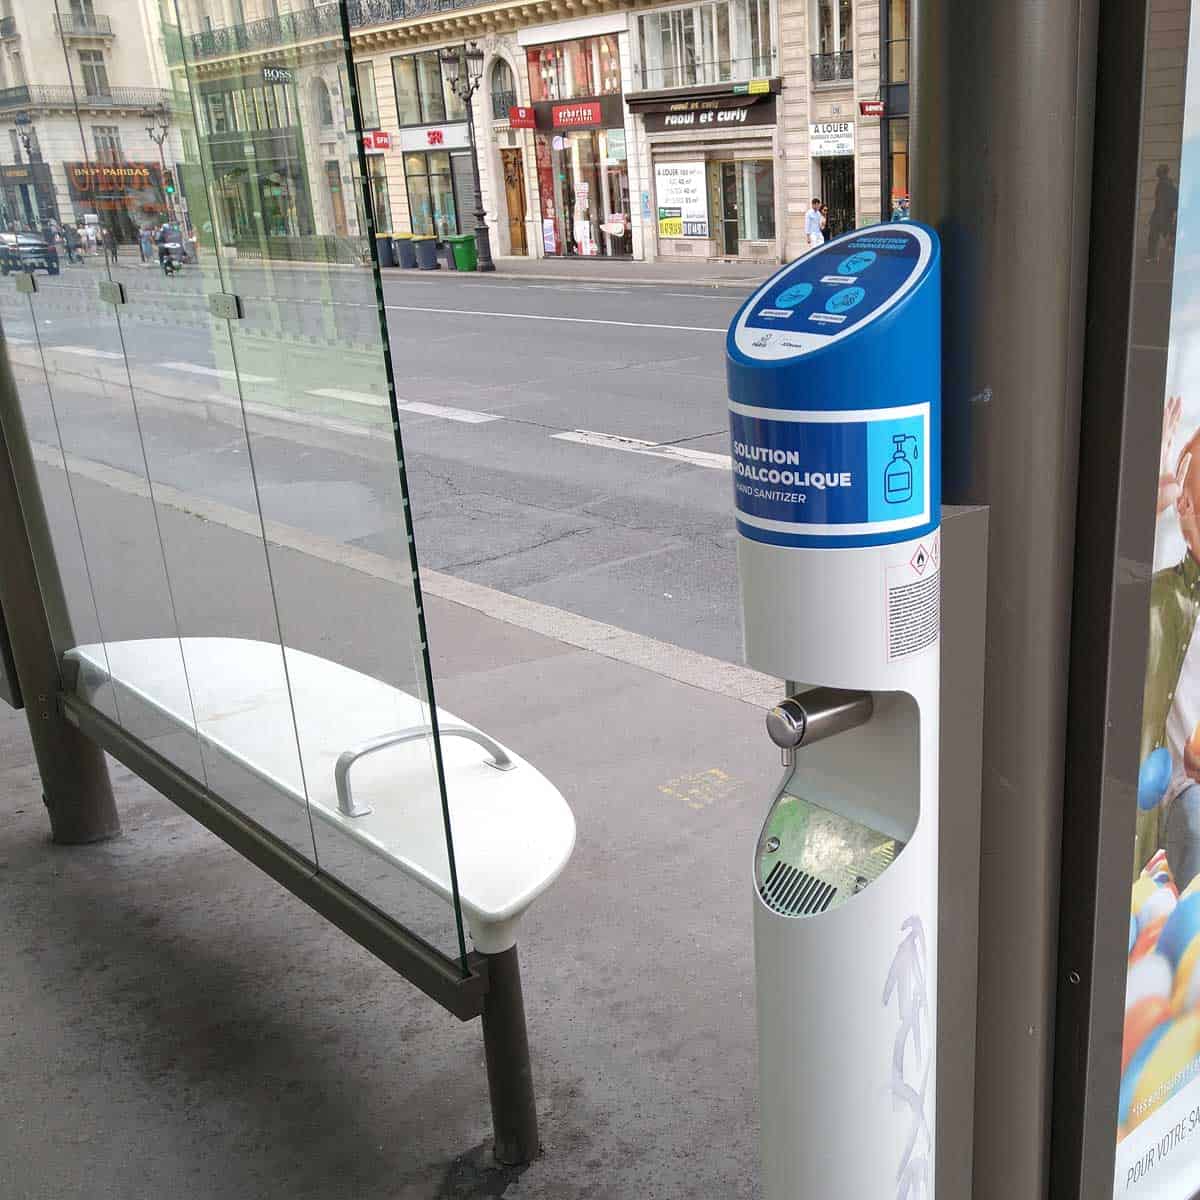 Gel dispensers at all the bus stops in Paris